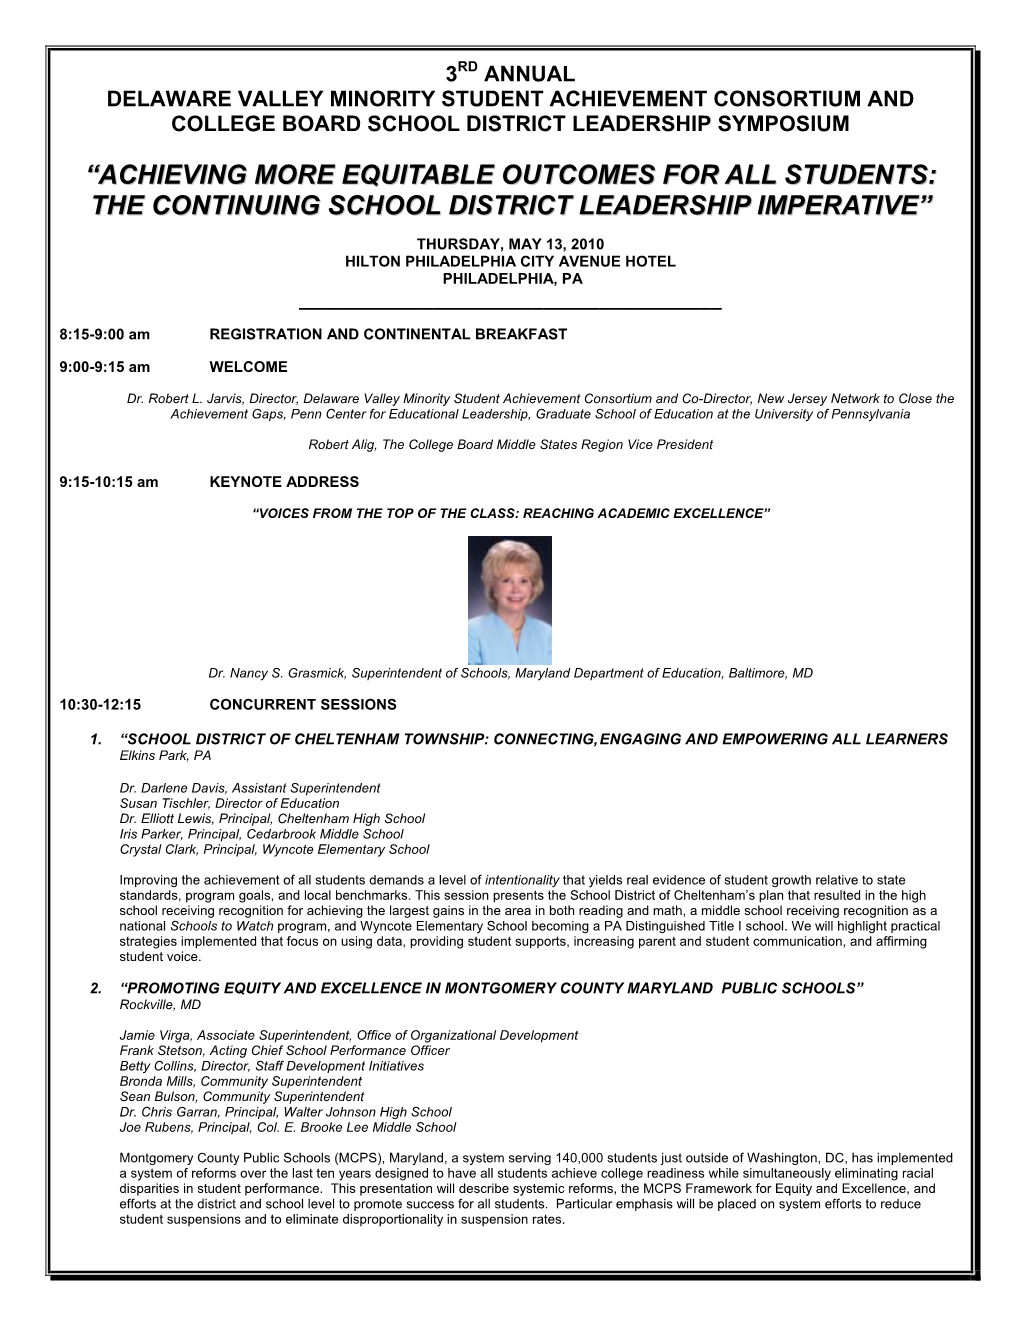 “Achieving More Equitable Outcomes for All Students: the Continuing School District Leadership Imperative”